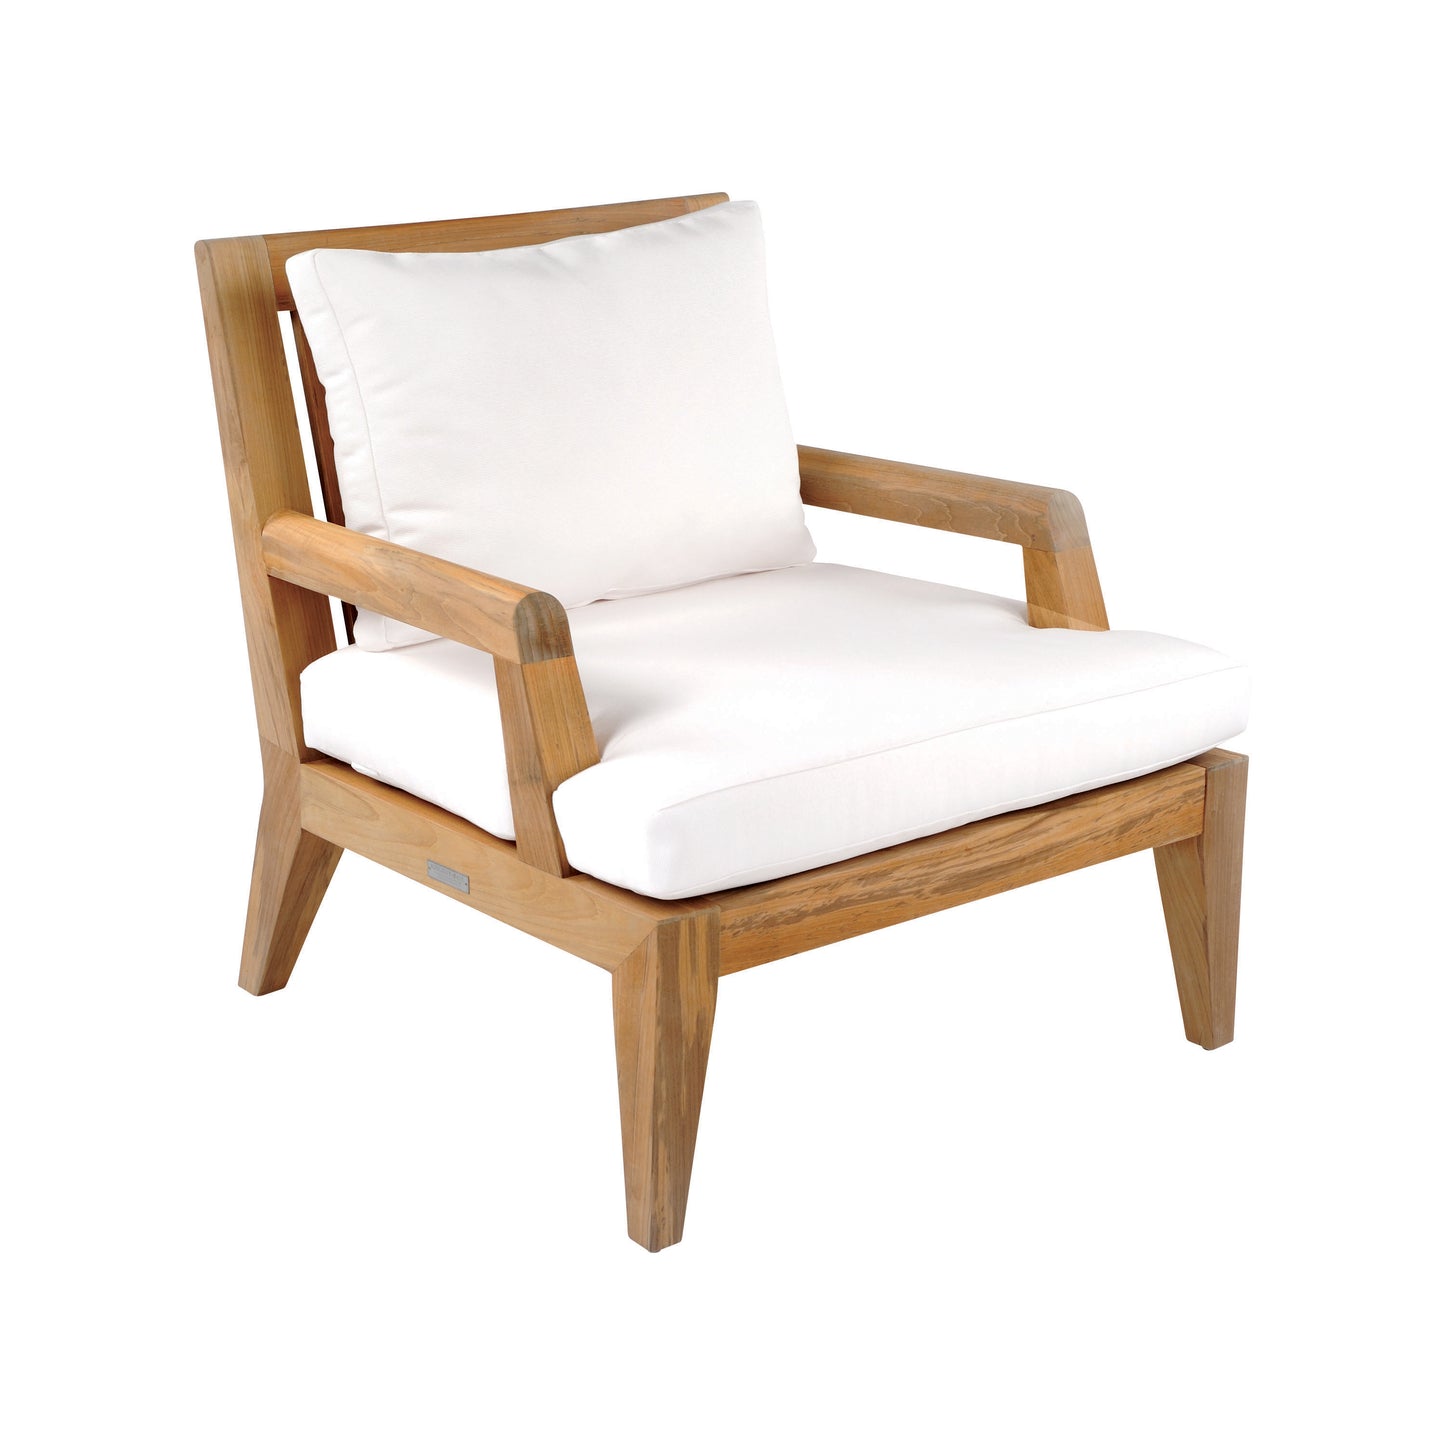 Mendocino Lounge Chair